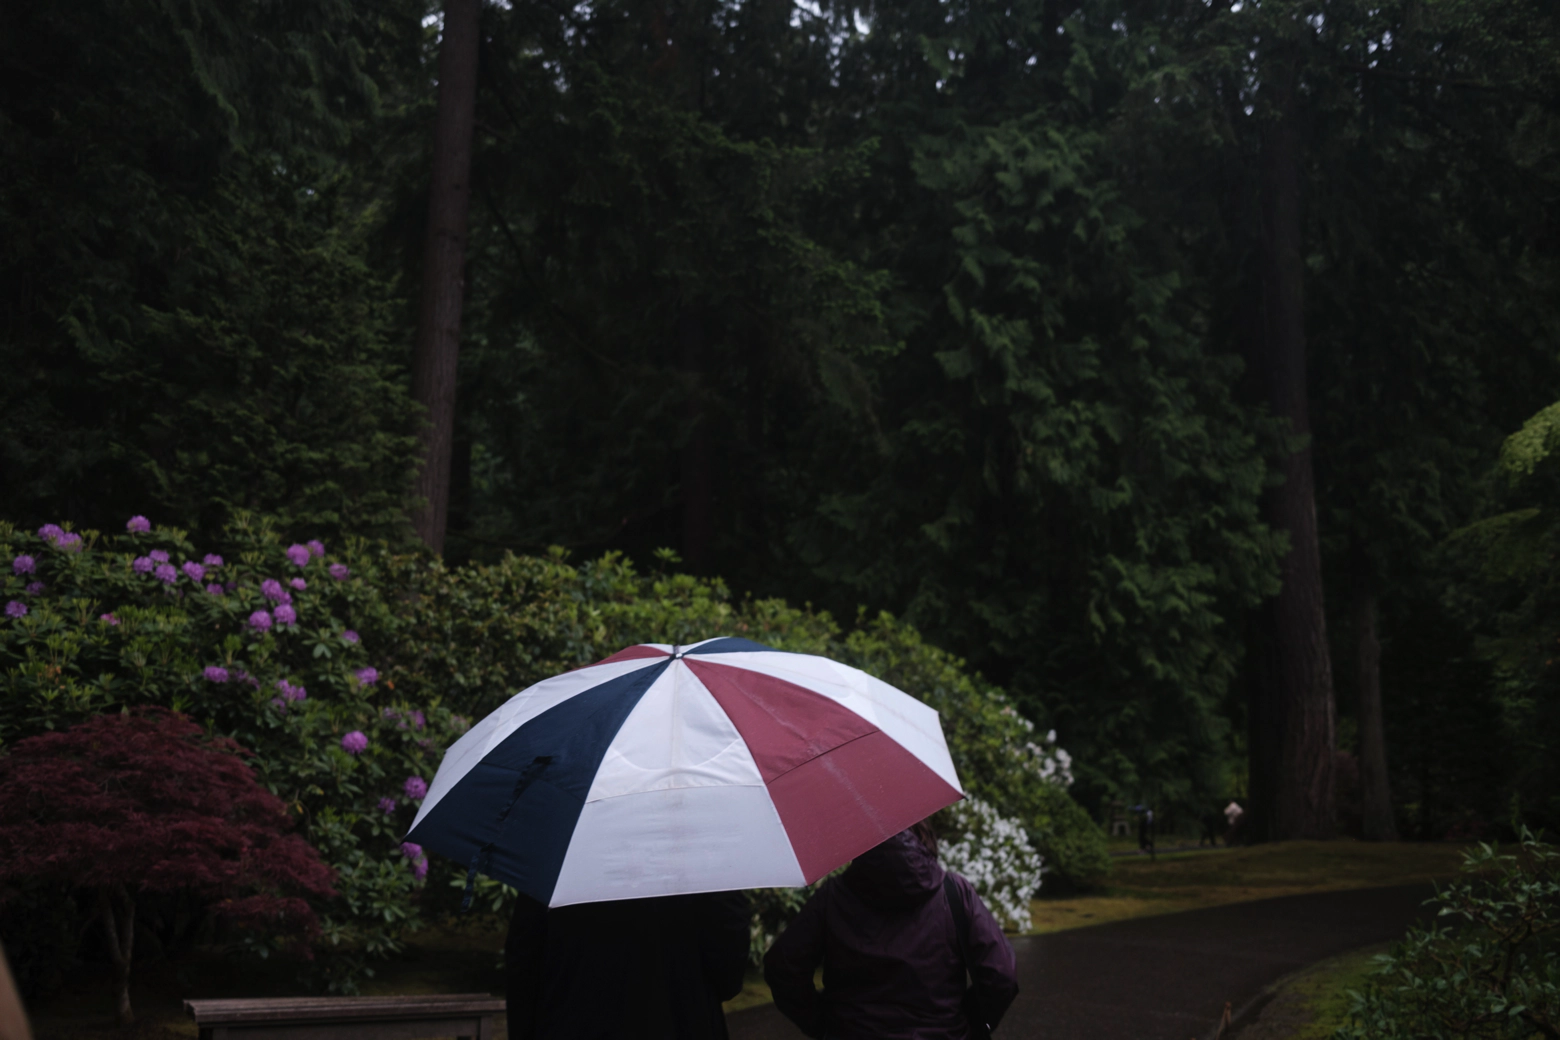 In the Japanese Tea Garden in Portland, Oregon a couple shelter from the rain beneath a red and blue umbrella.